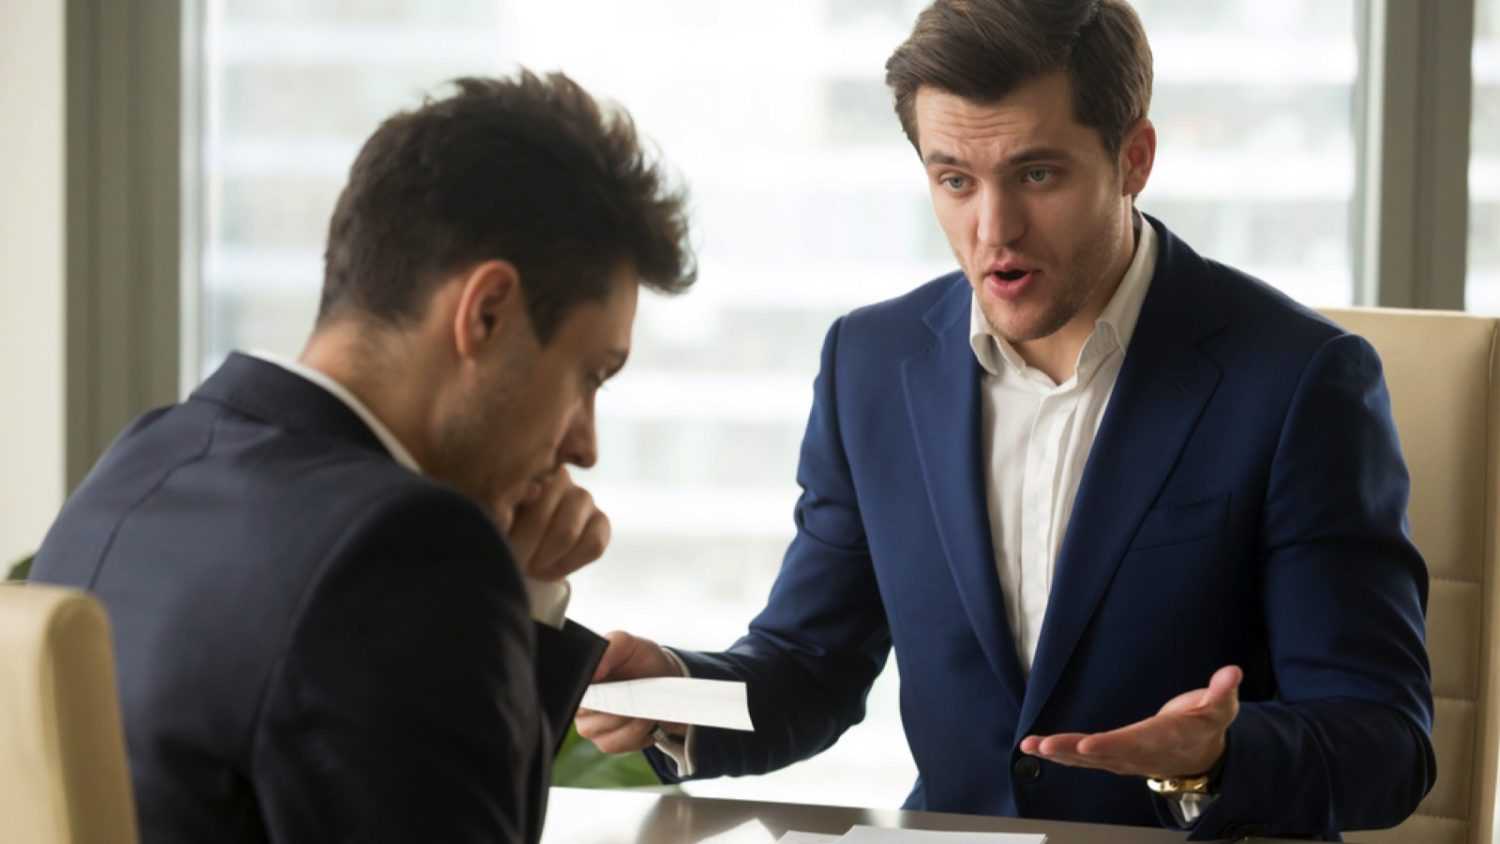 Angry boss yelling at employer